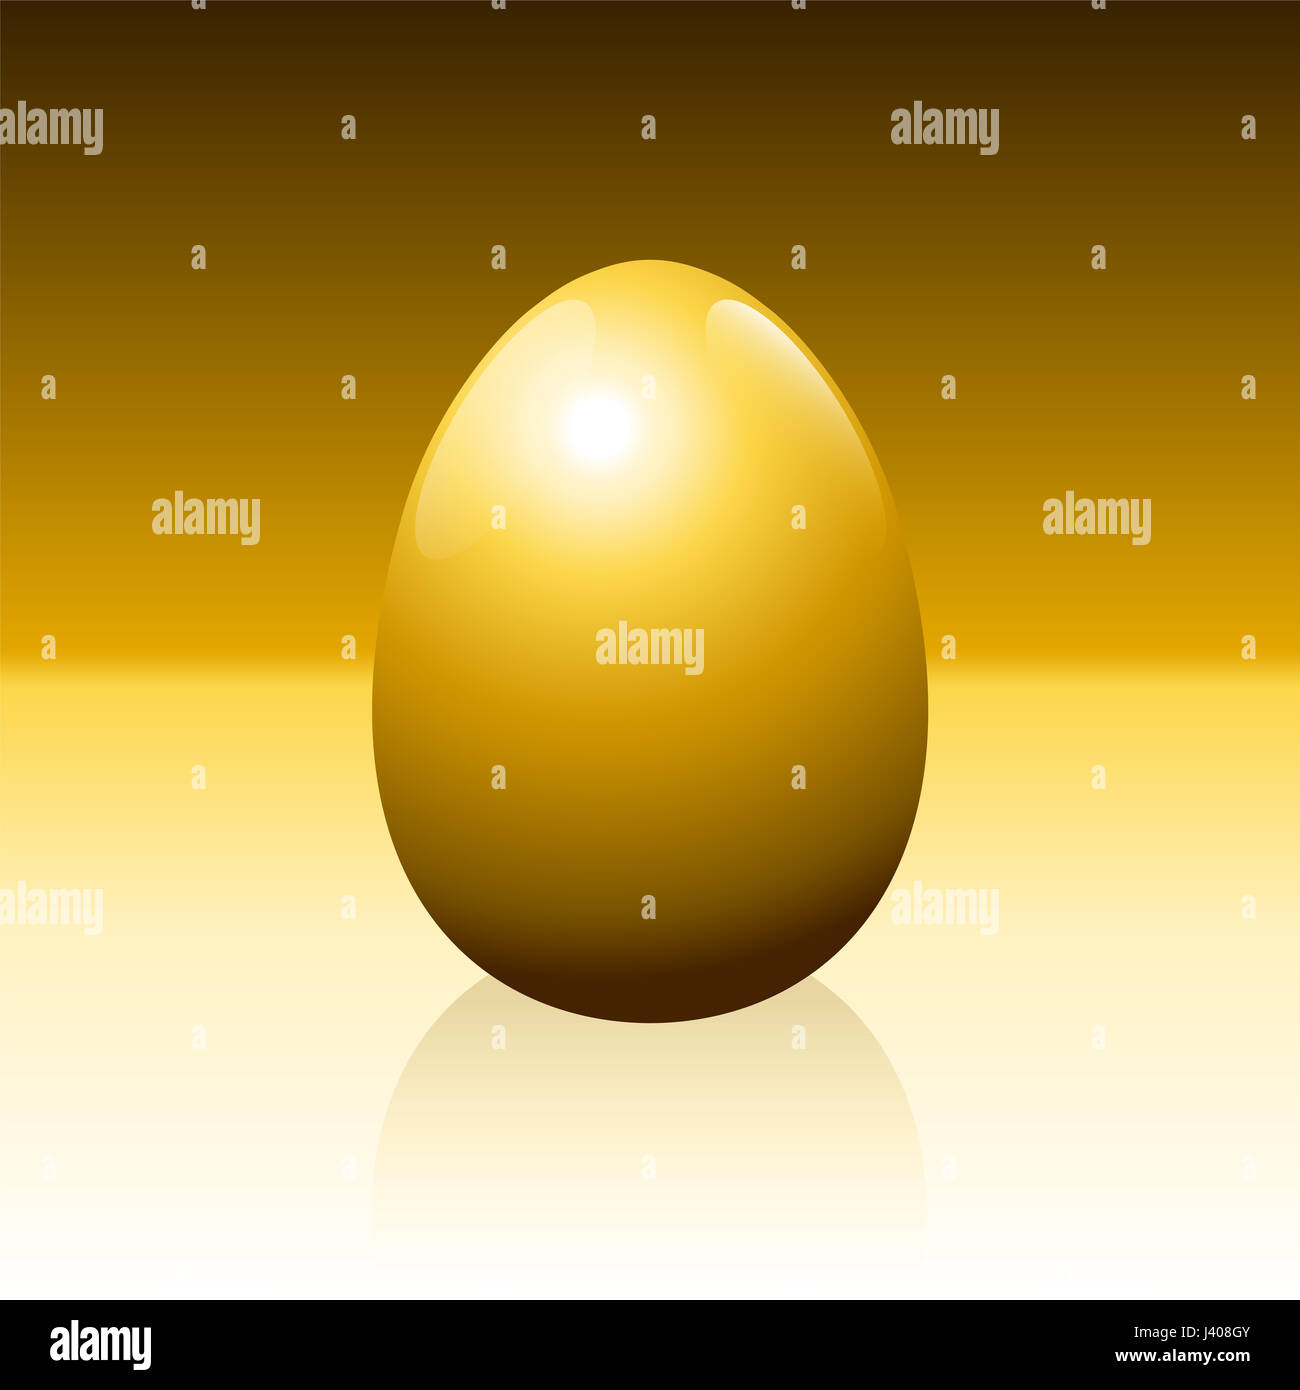 Golden egg on golden background - idiom for success, profit, wealth, financial luck or any other lucrative business issues -  illustration. Stock Photo